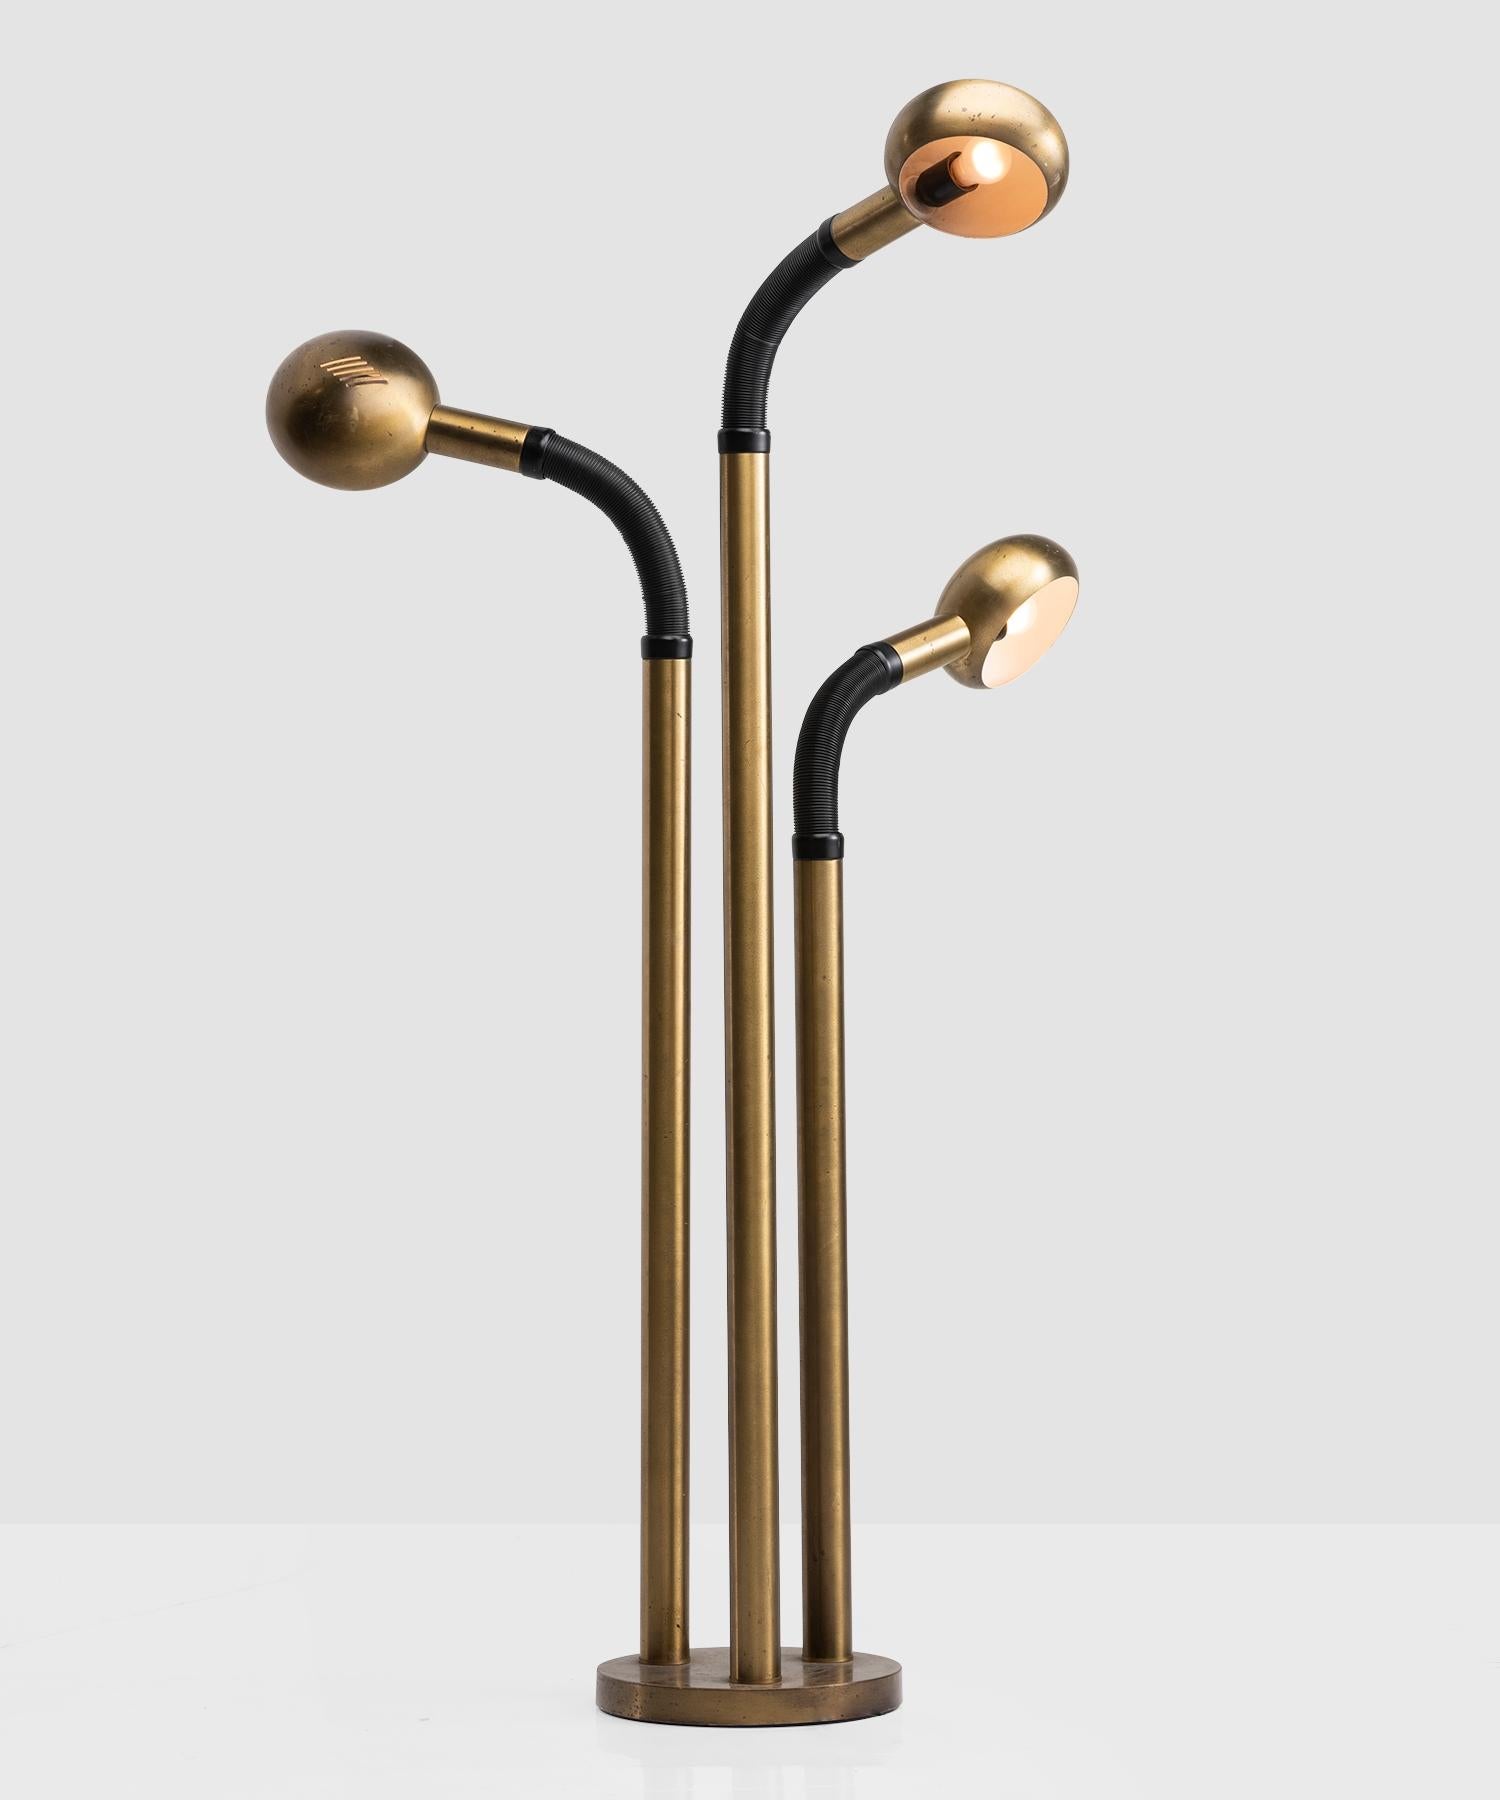 Unique brass floor lamp with (3) perforated heads on adjustable black arm.